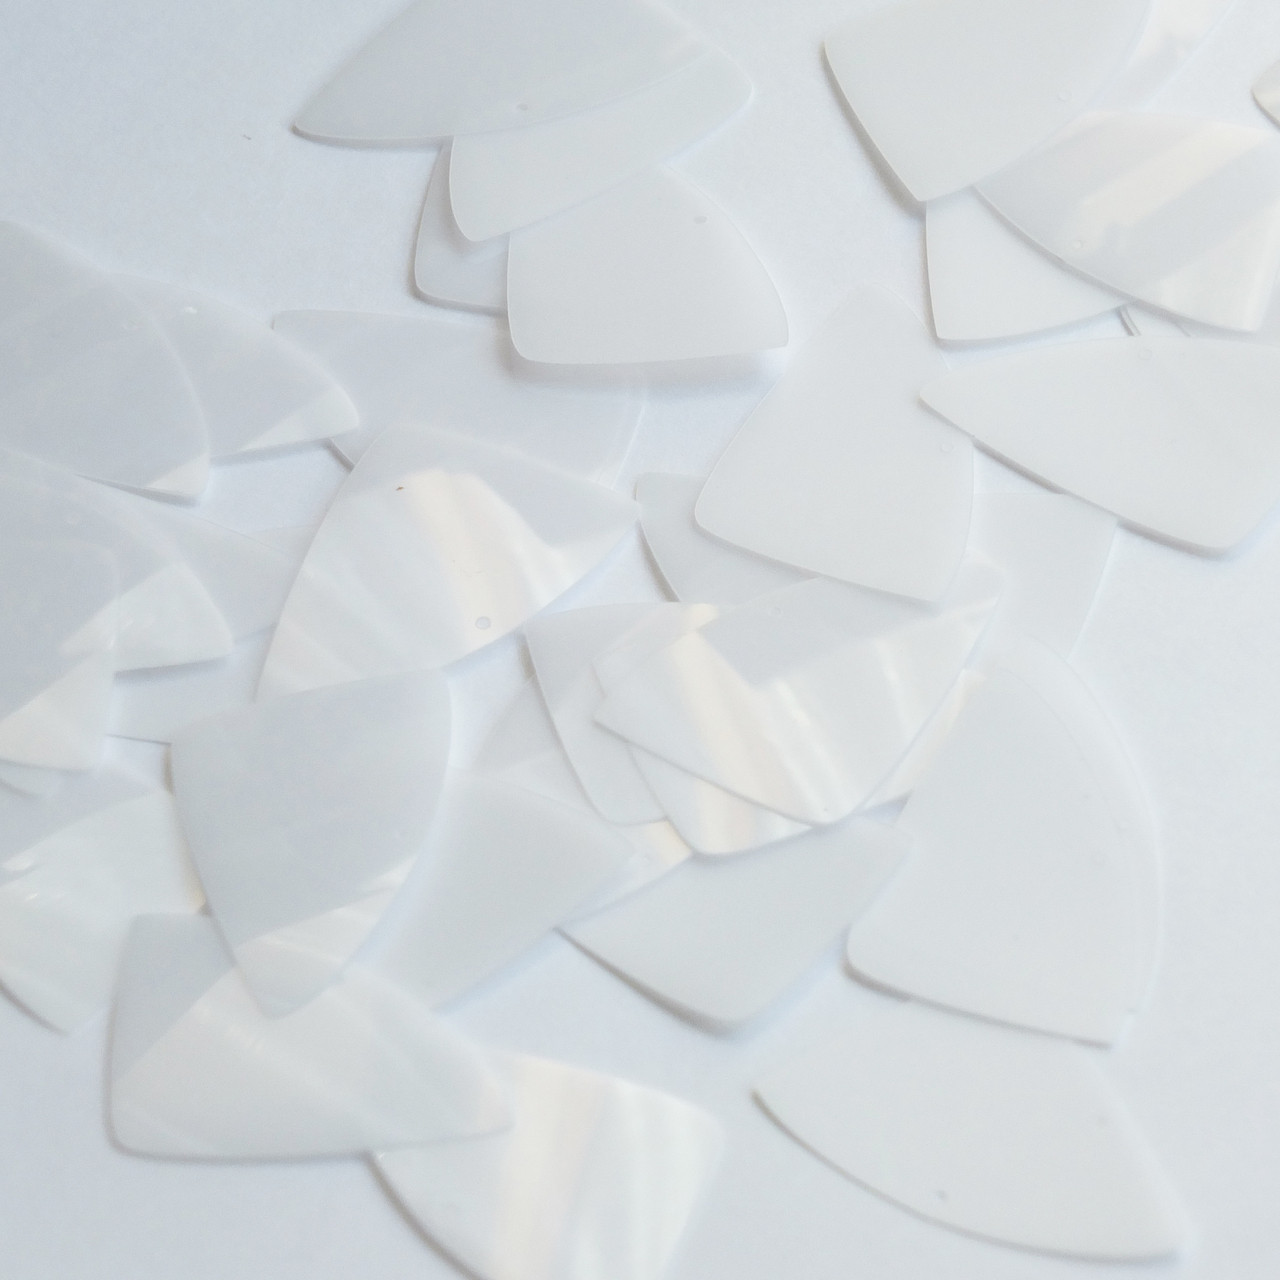 Fishscale Fin Sequin 1.5" Milky White Transparent Glossy and Matte Duo Two Sided